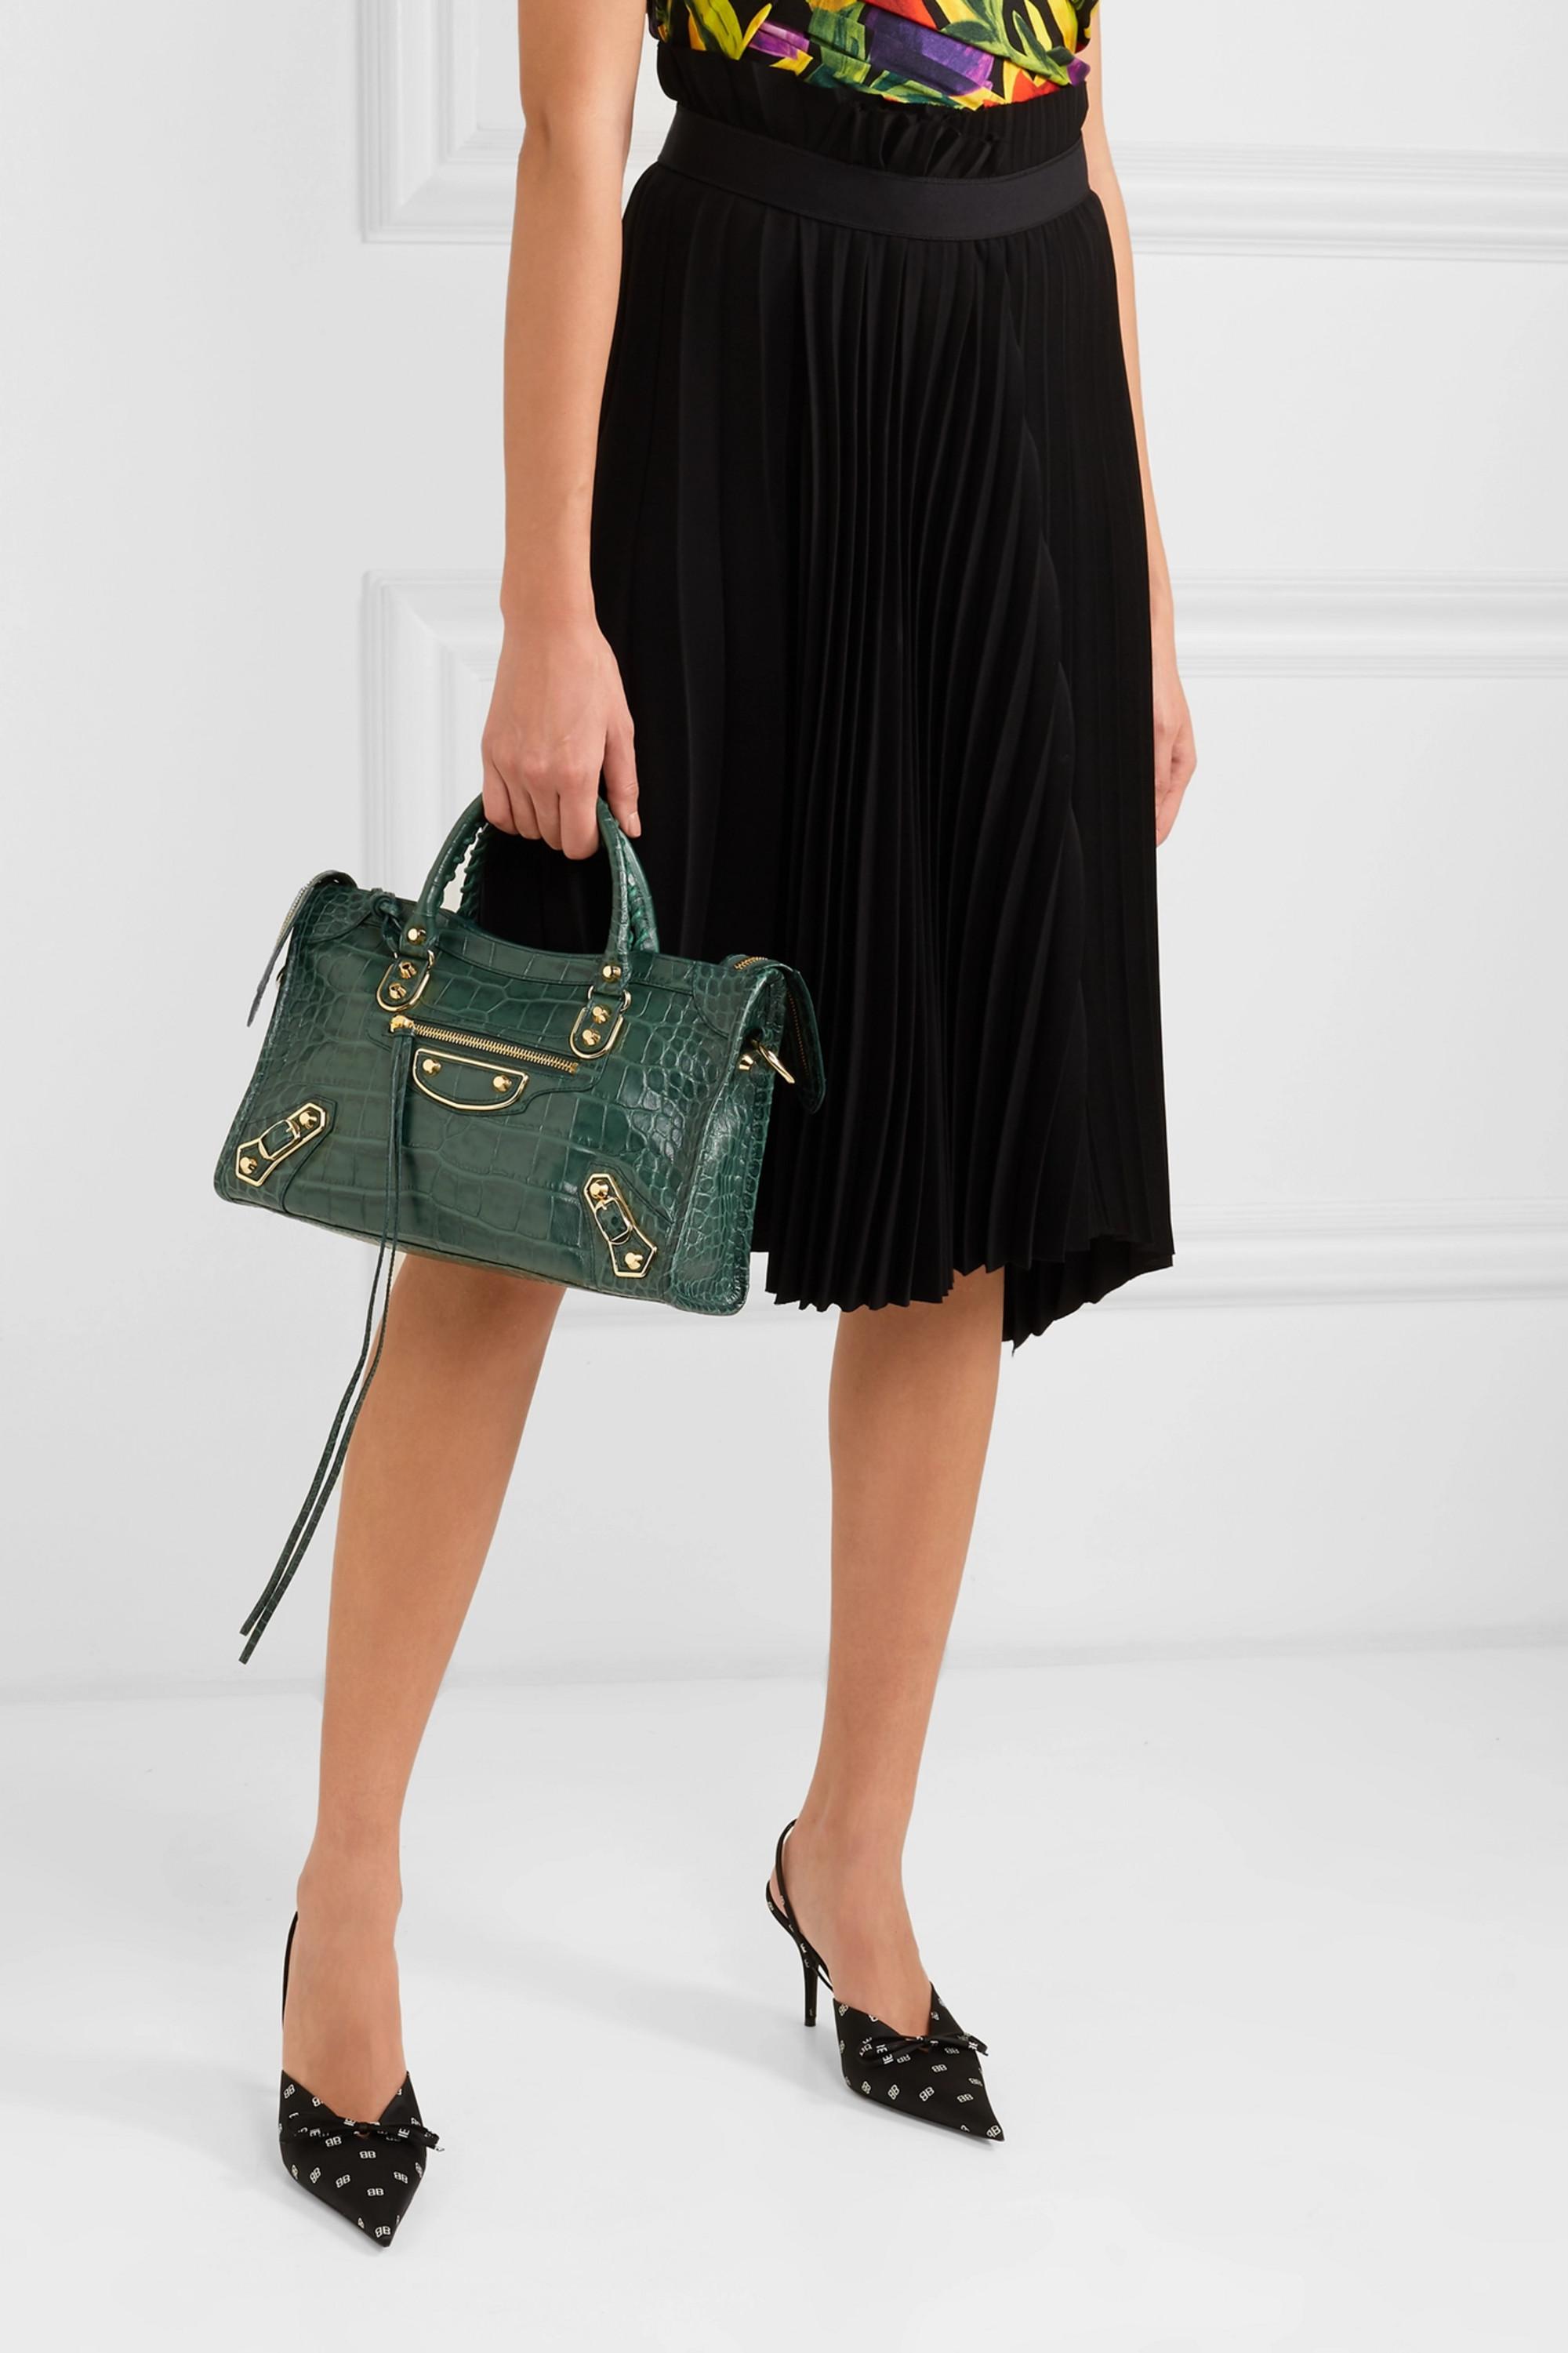 Balenciaga Classic City Small Croc-effect Leather Tote in Army Green  (Green) - Lyst